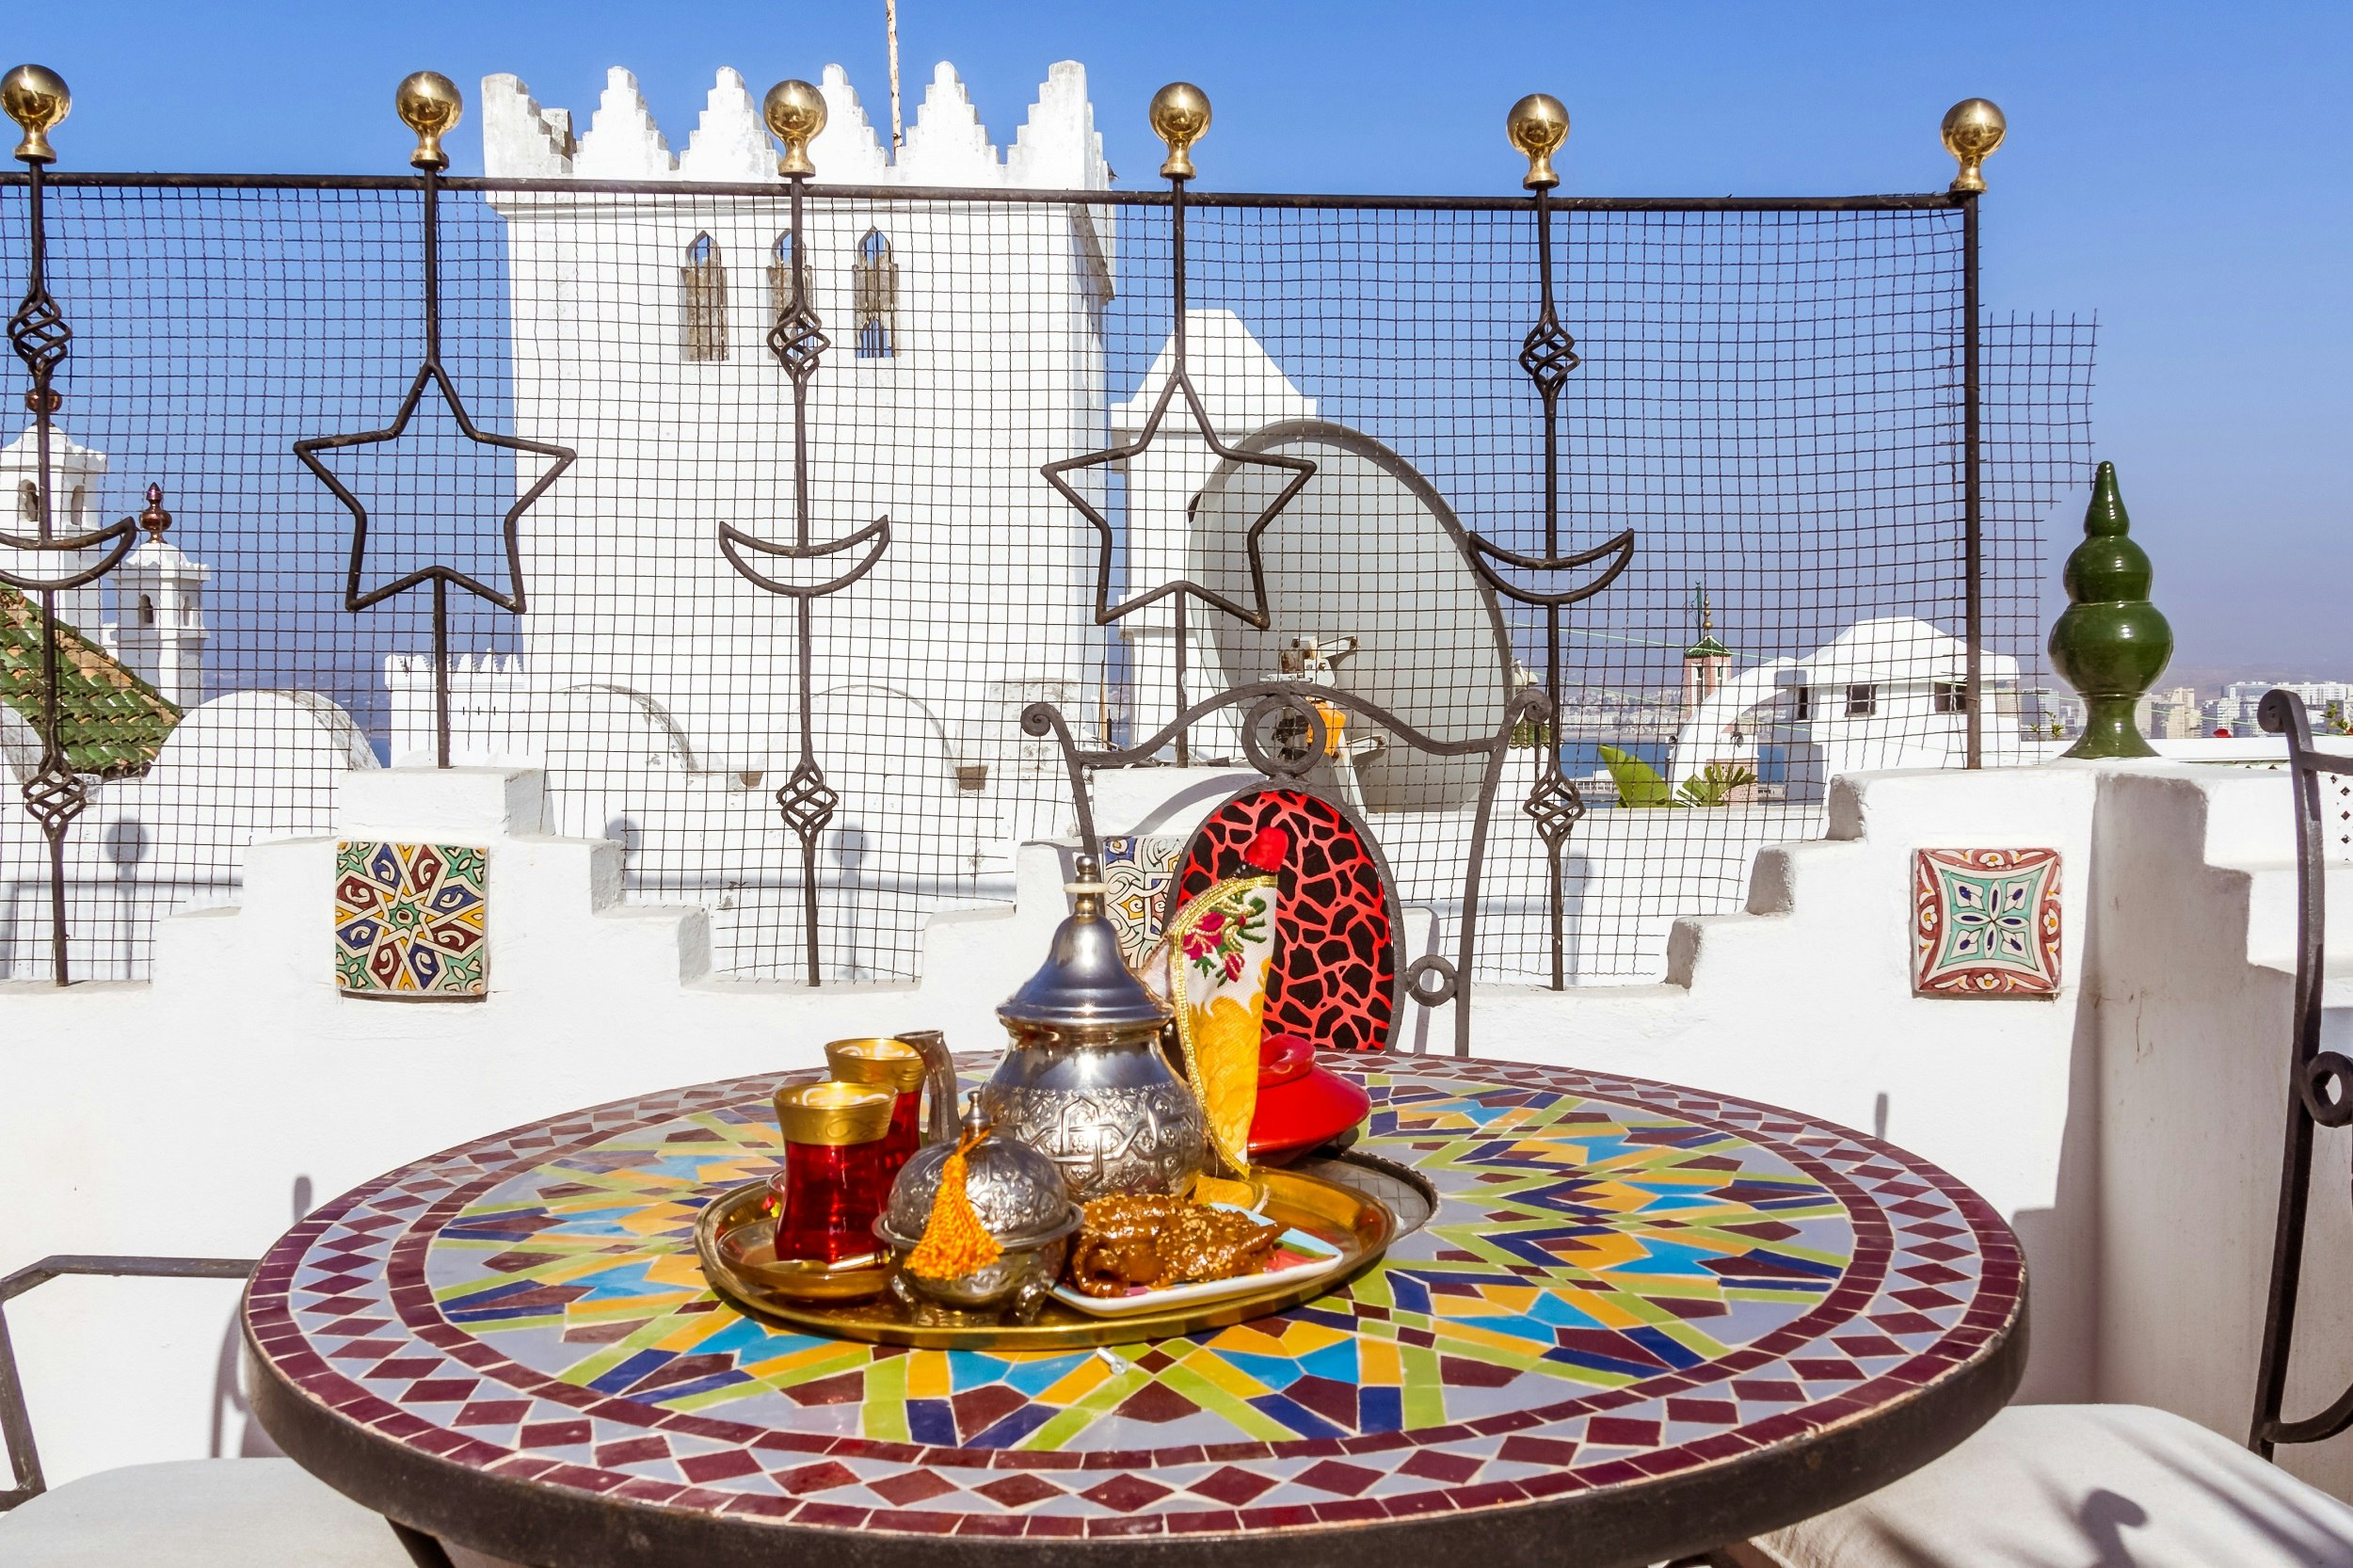 Tea service on a colourful tile mosaic table on a terrace in the kasbah of Tangier.